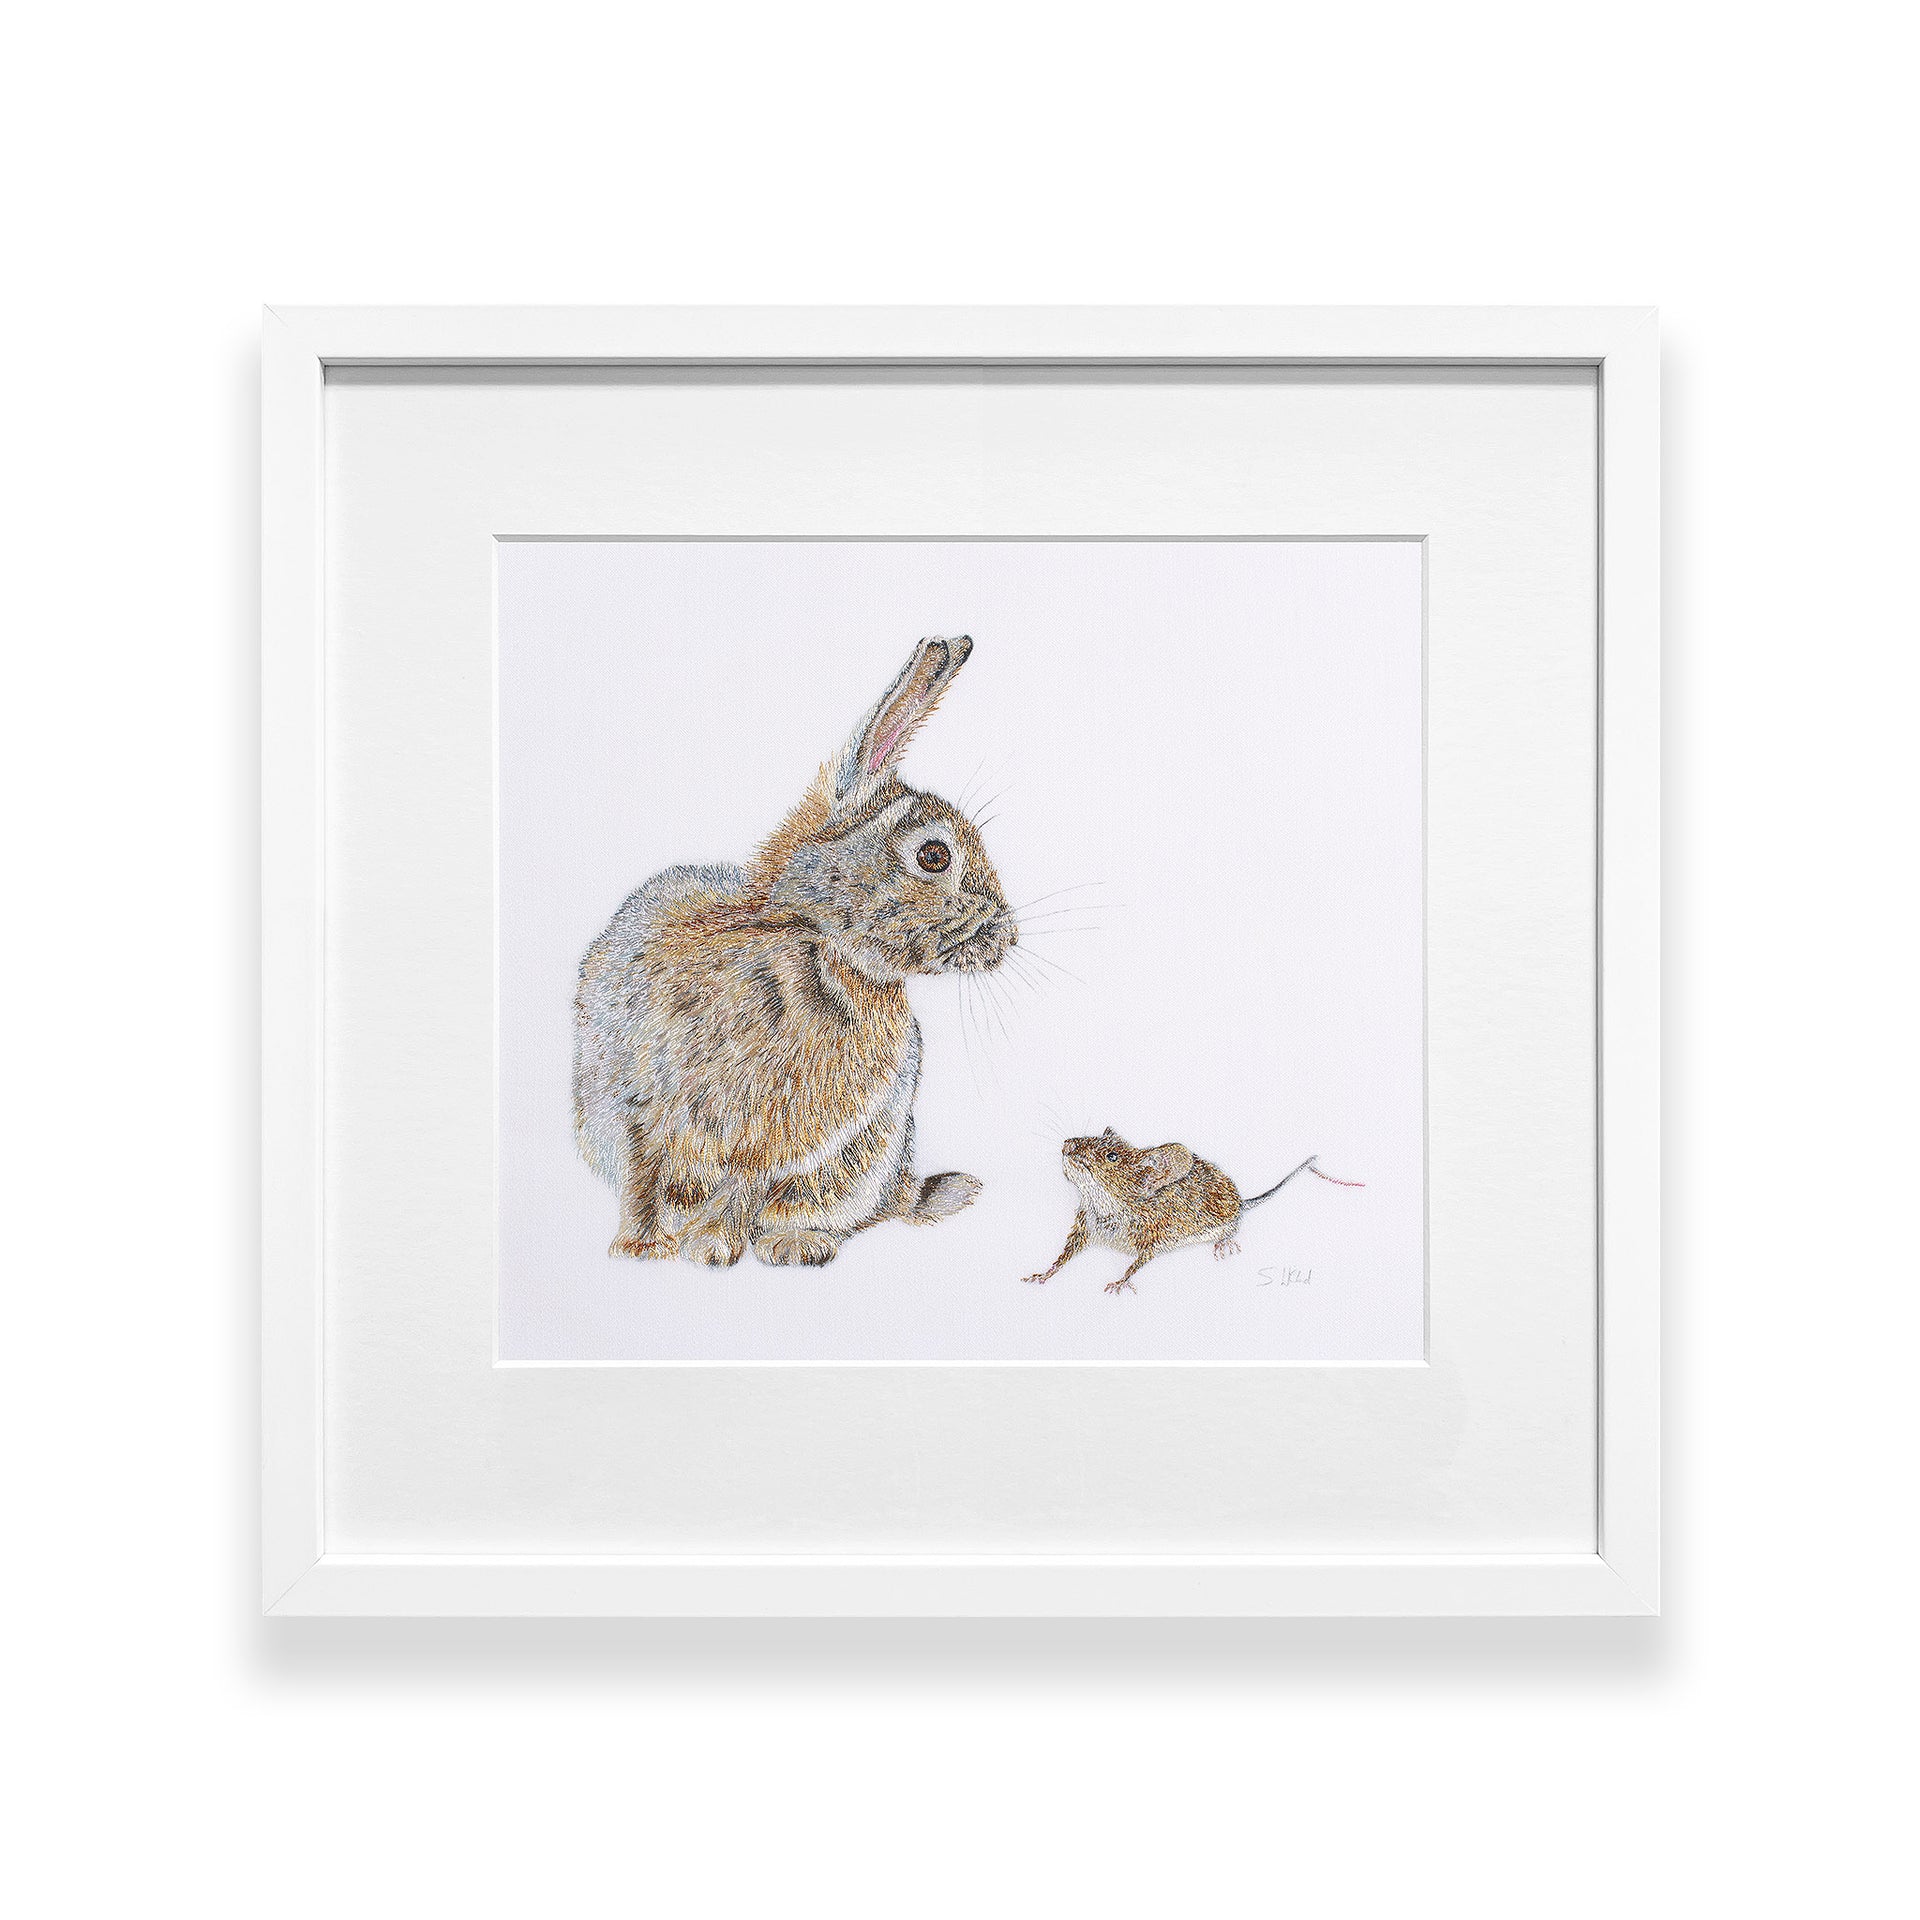 Rabbit & Mouse hand embroidered artwork in a white frame